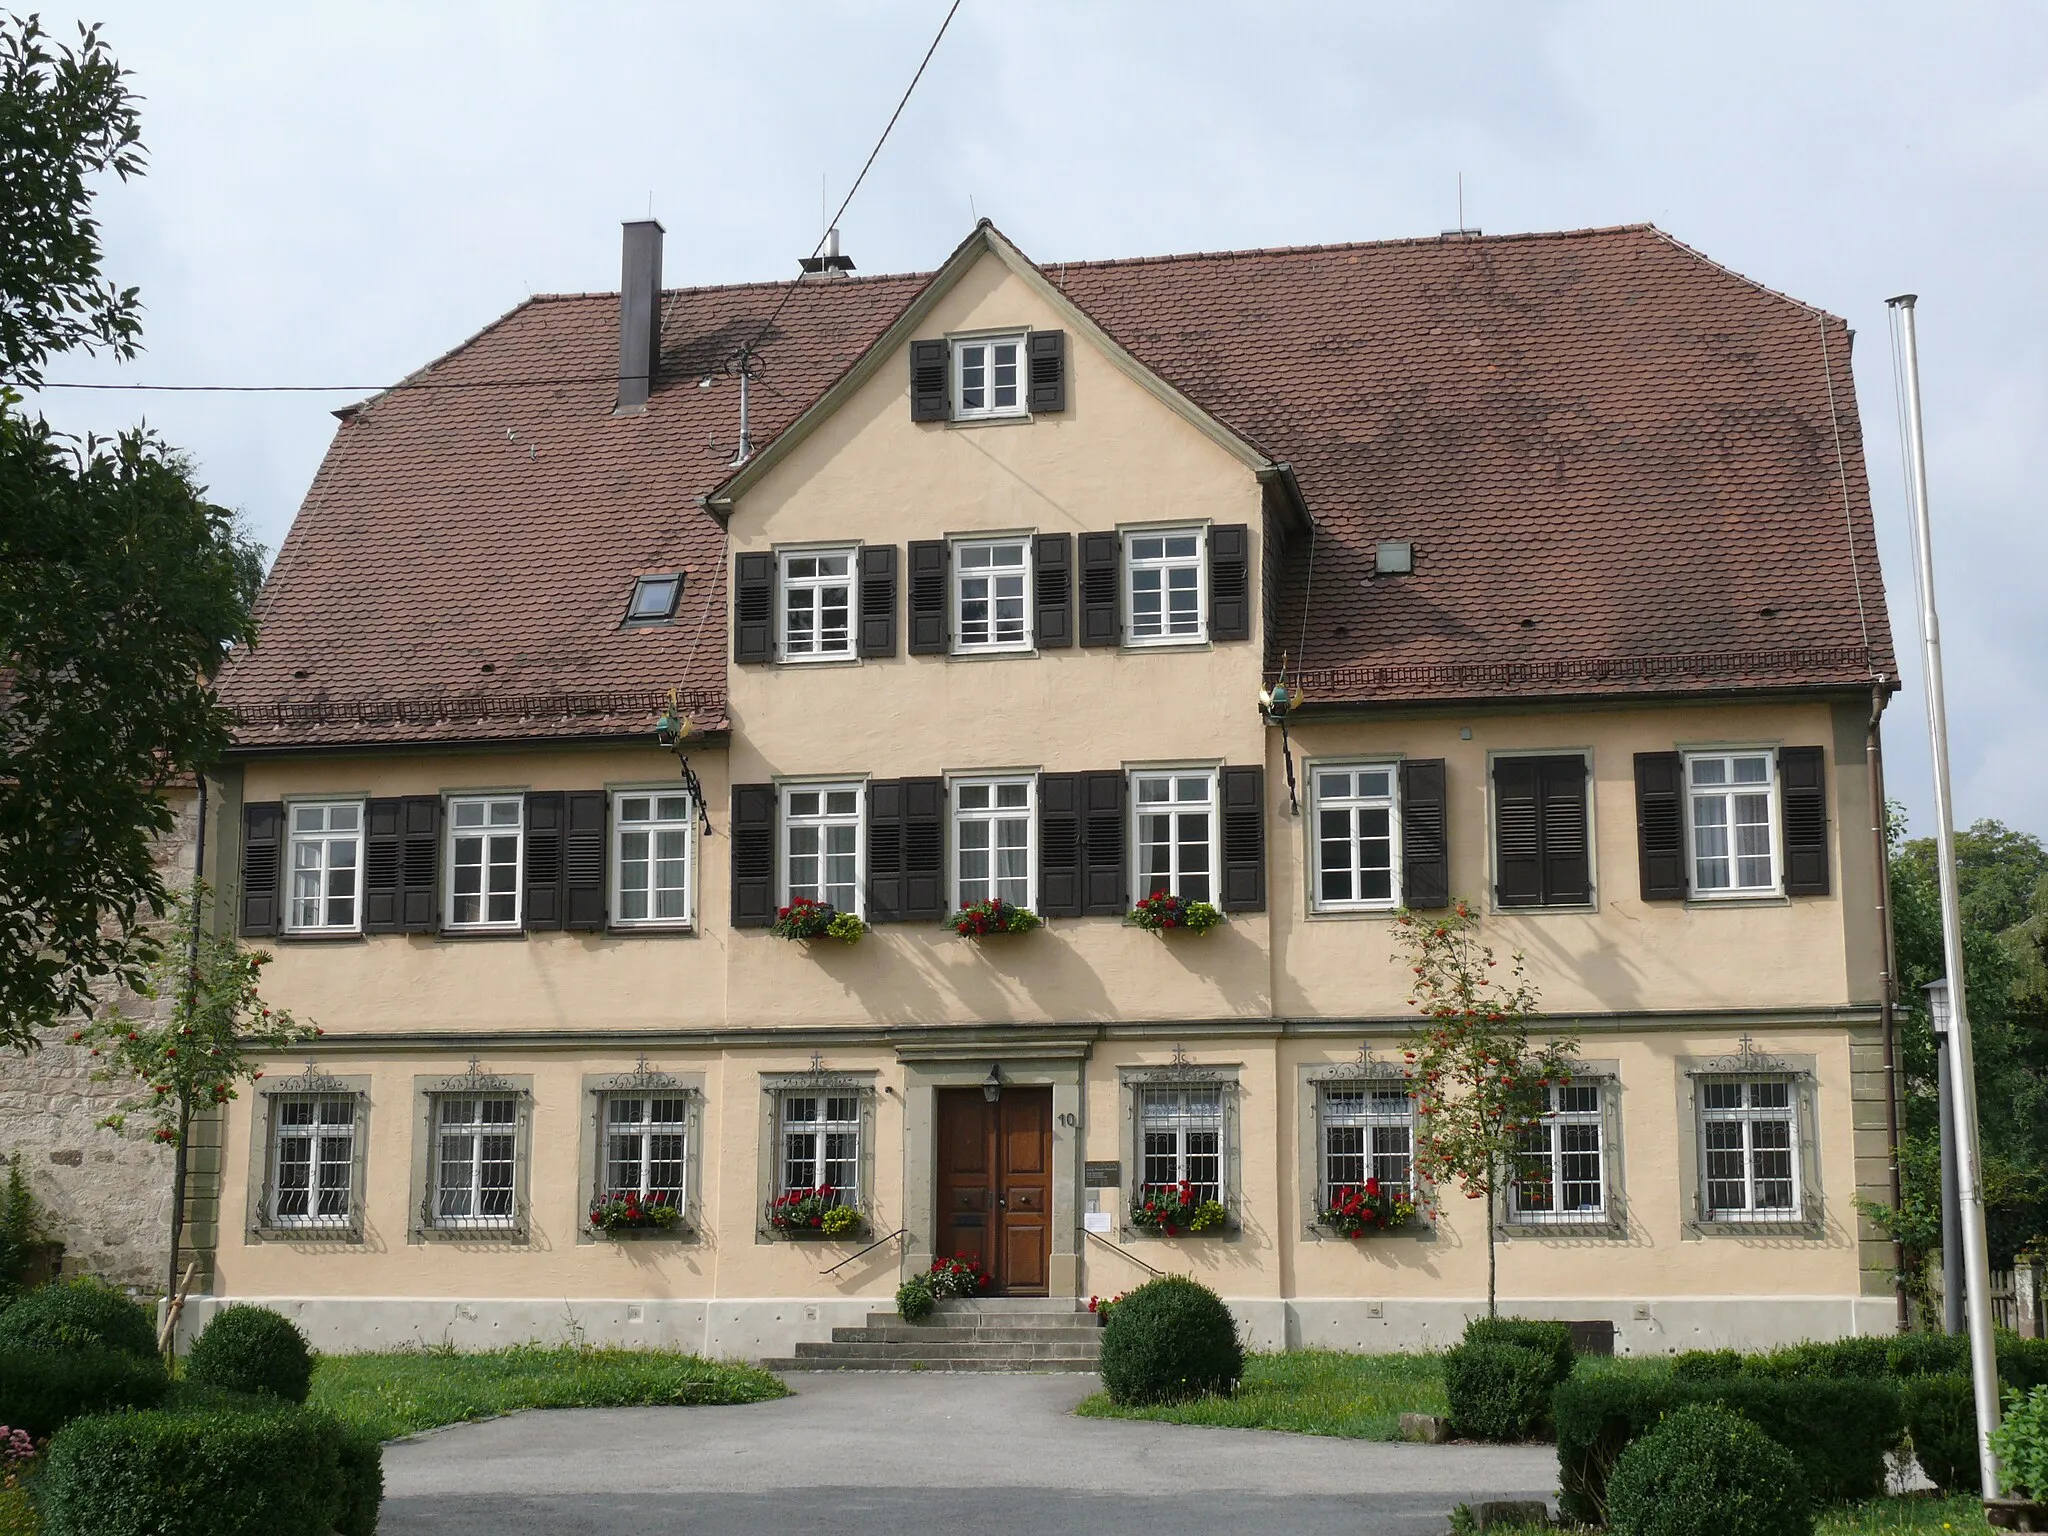 Photo showing: Murrhardt (Baden-Württemberg, Germany): the rectory/parish house (often called Neue Abtei or Prälatur, built in 1770), main front with main entrance, seen from northeast.